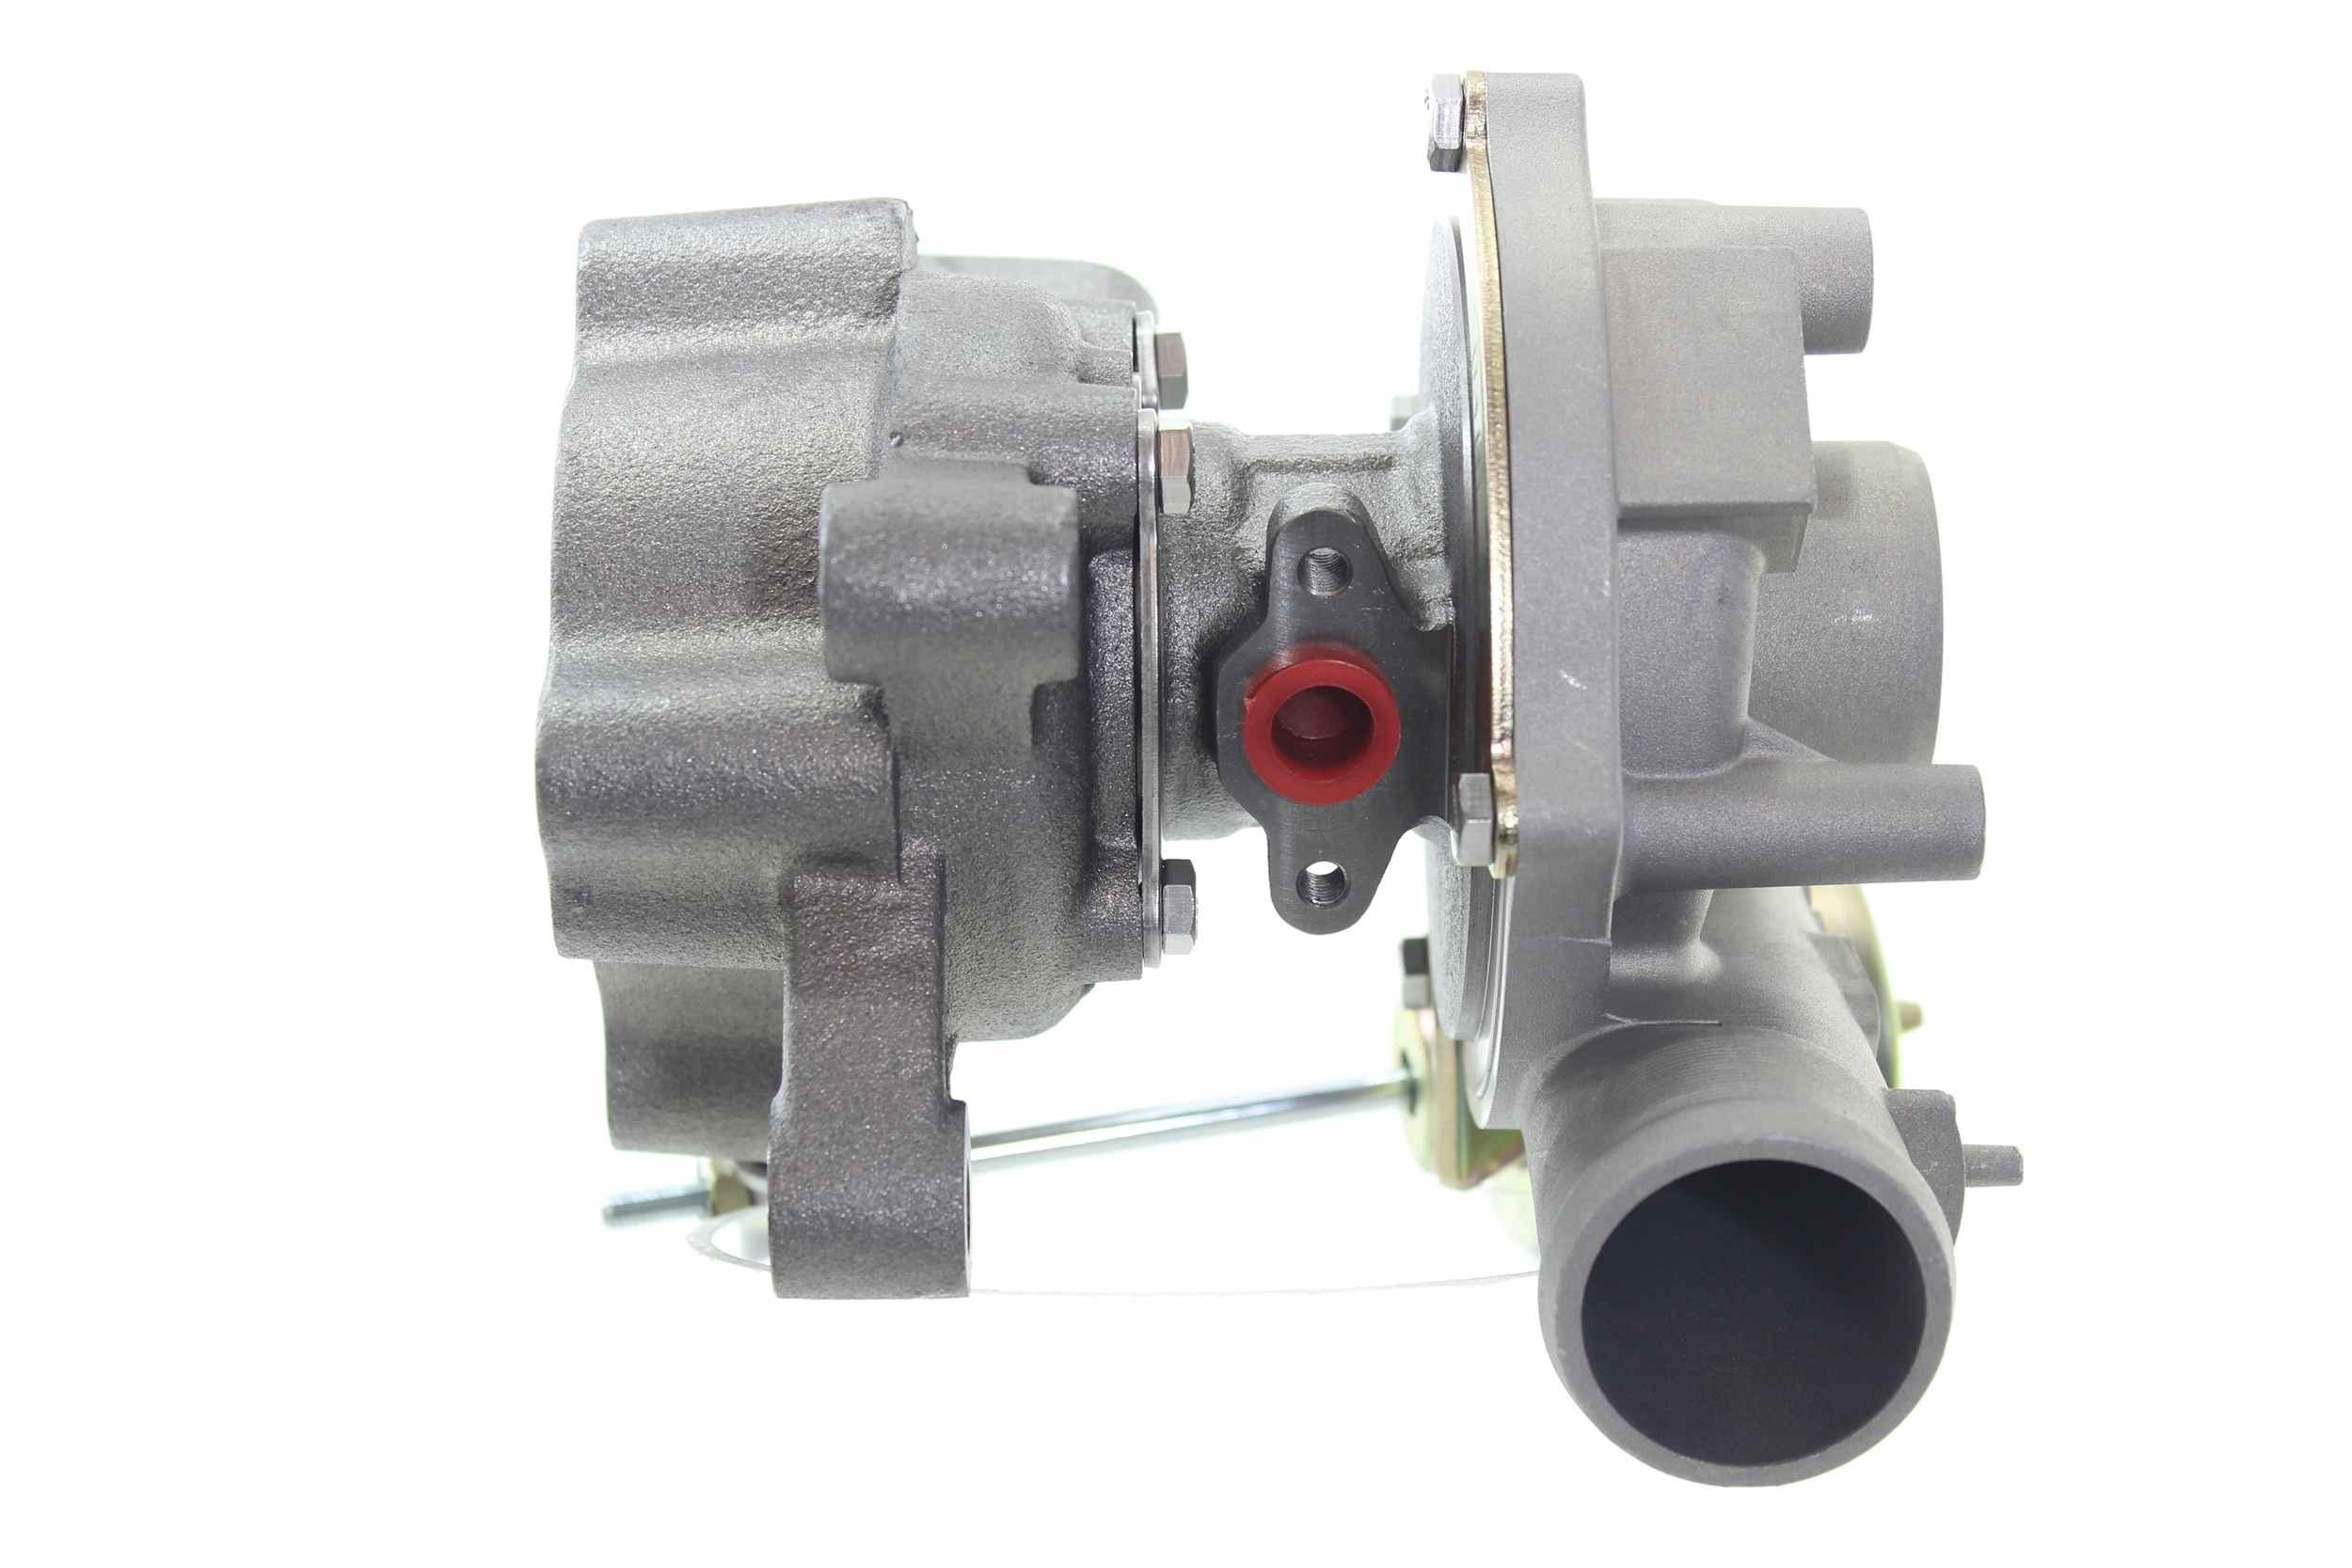 10900624 Turbocharger 10900624 ALANKO Exhaust Turbocharger, Incl. Gasket Set, with attachment material